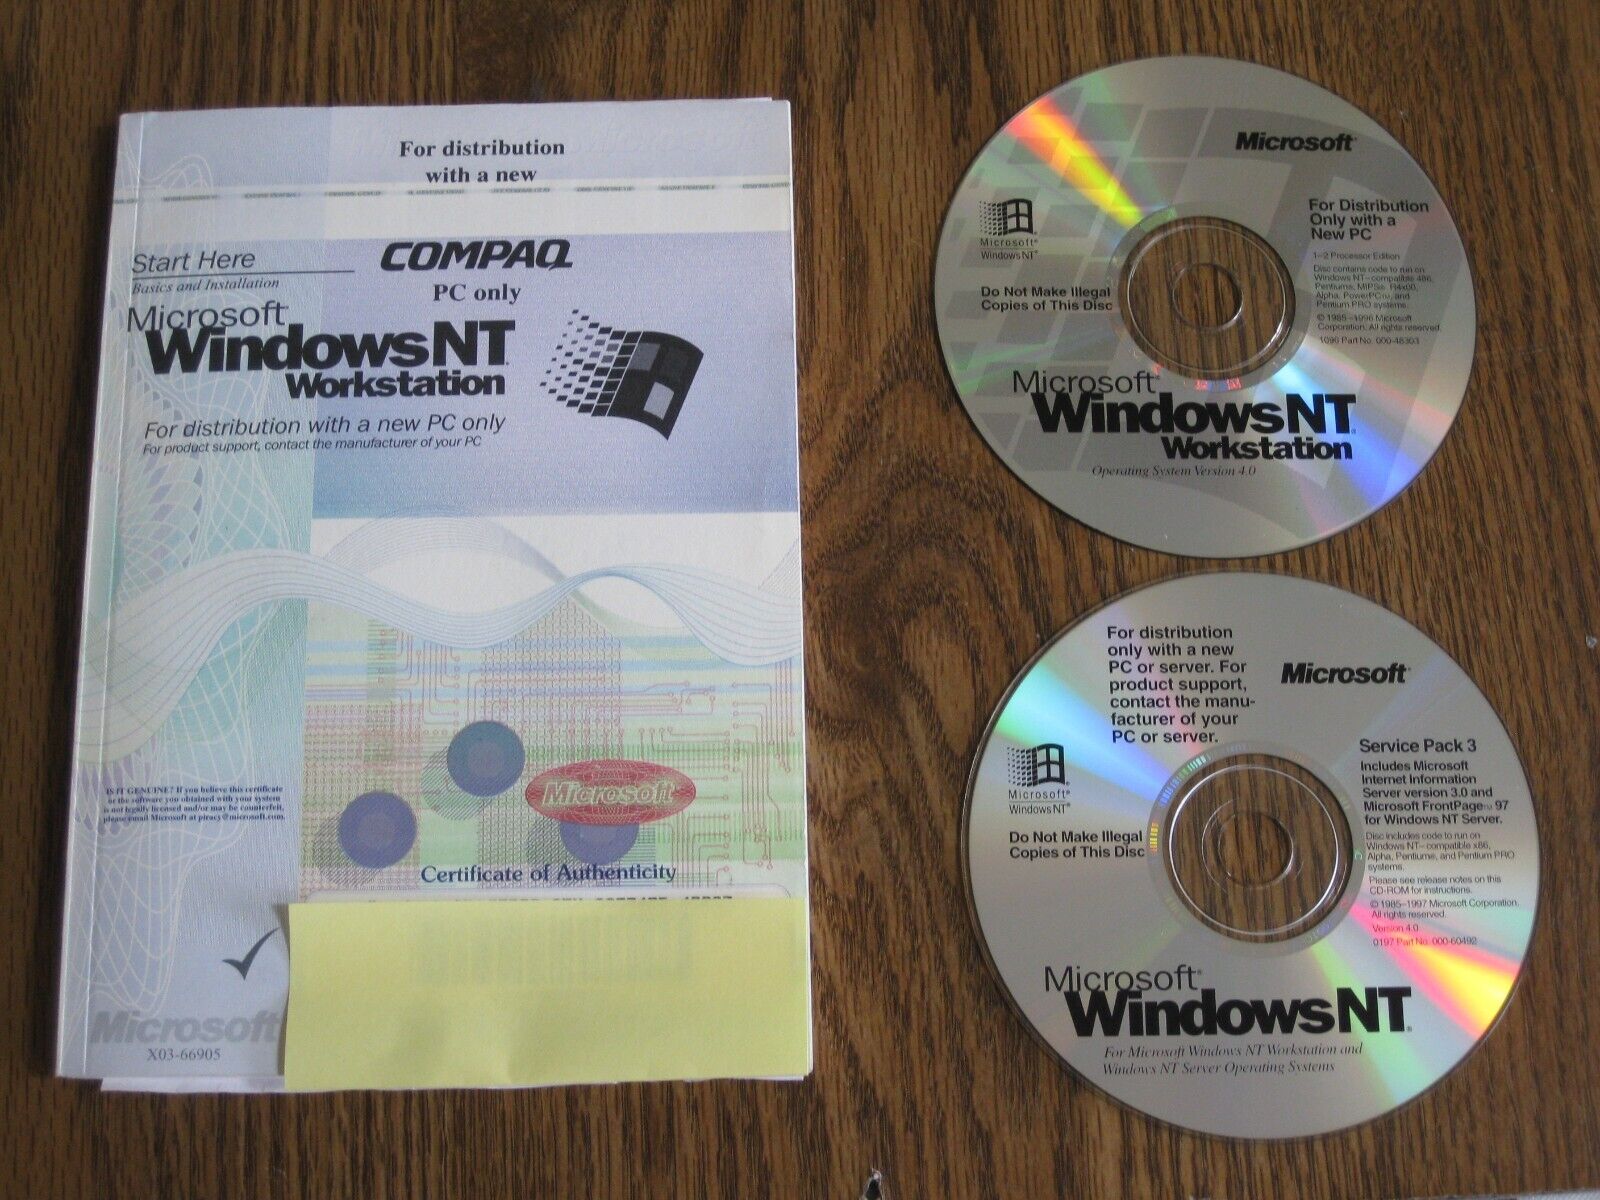 Microsoft Windows NT Workstation OS Version 4.0 With CD, SP3 CD, Book & Key